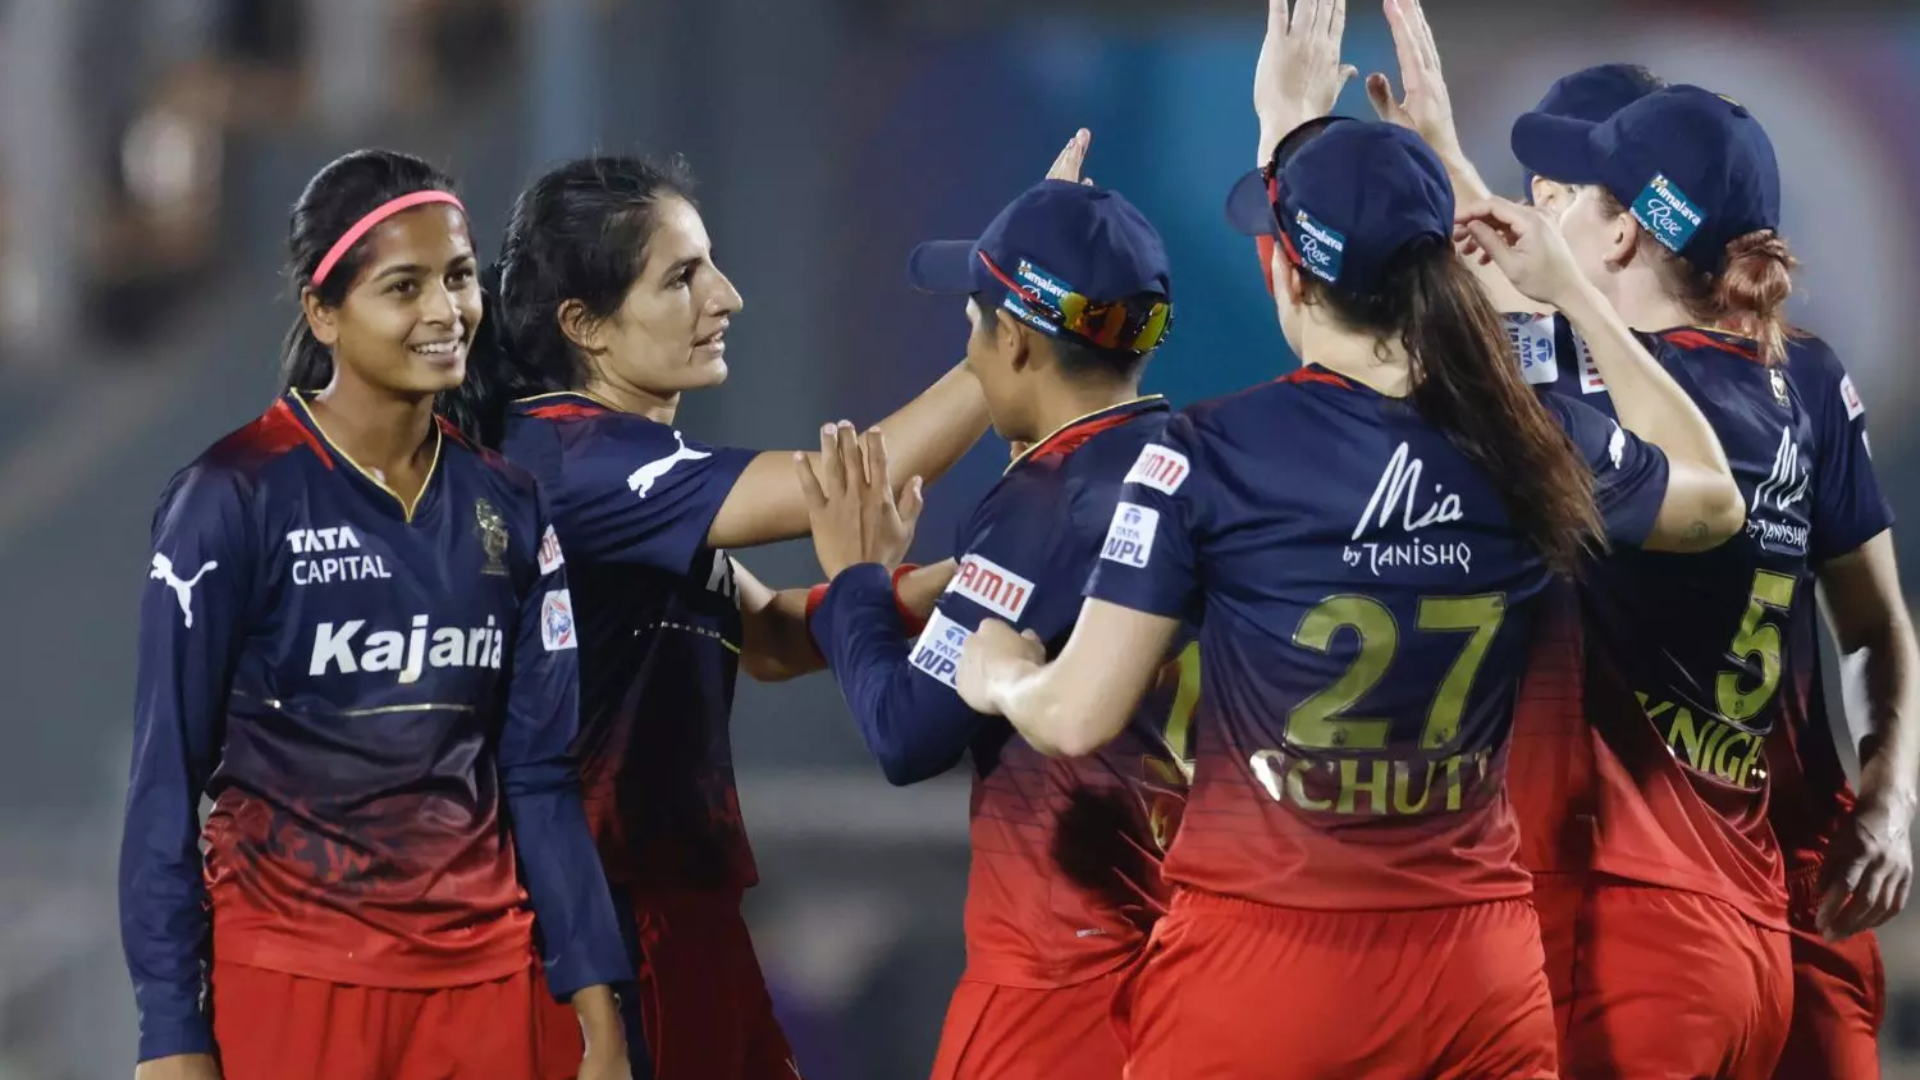 Molineux Credits Renuka For RCB’s Powerplay Control And Momentum